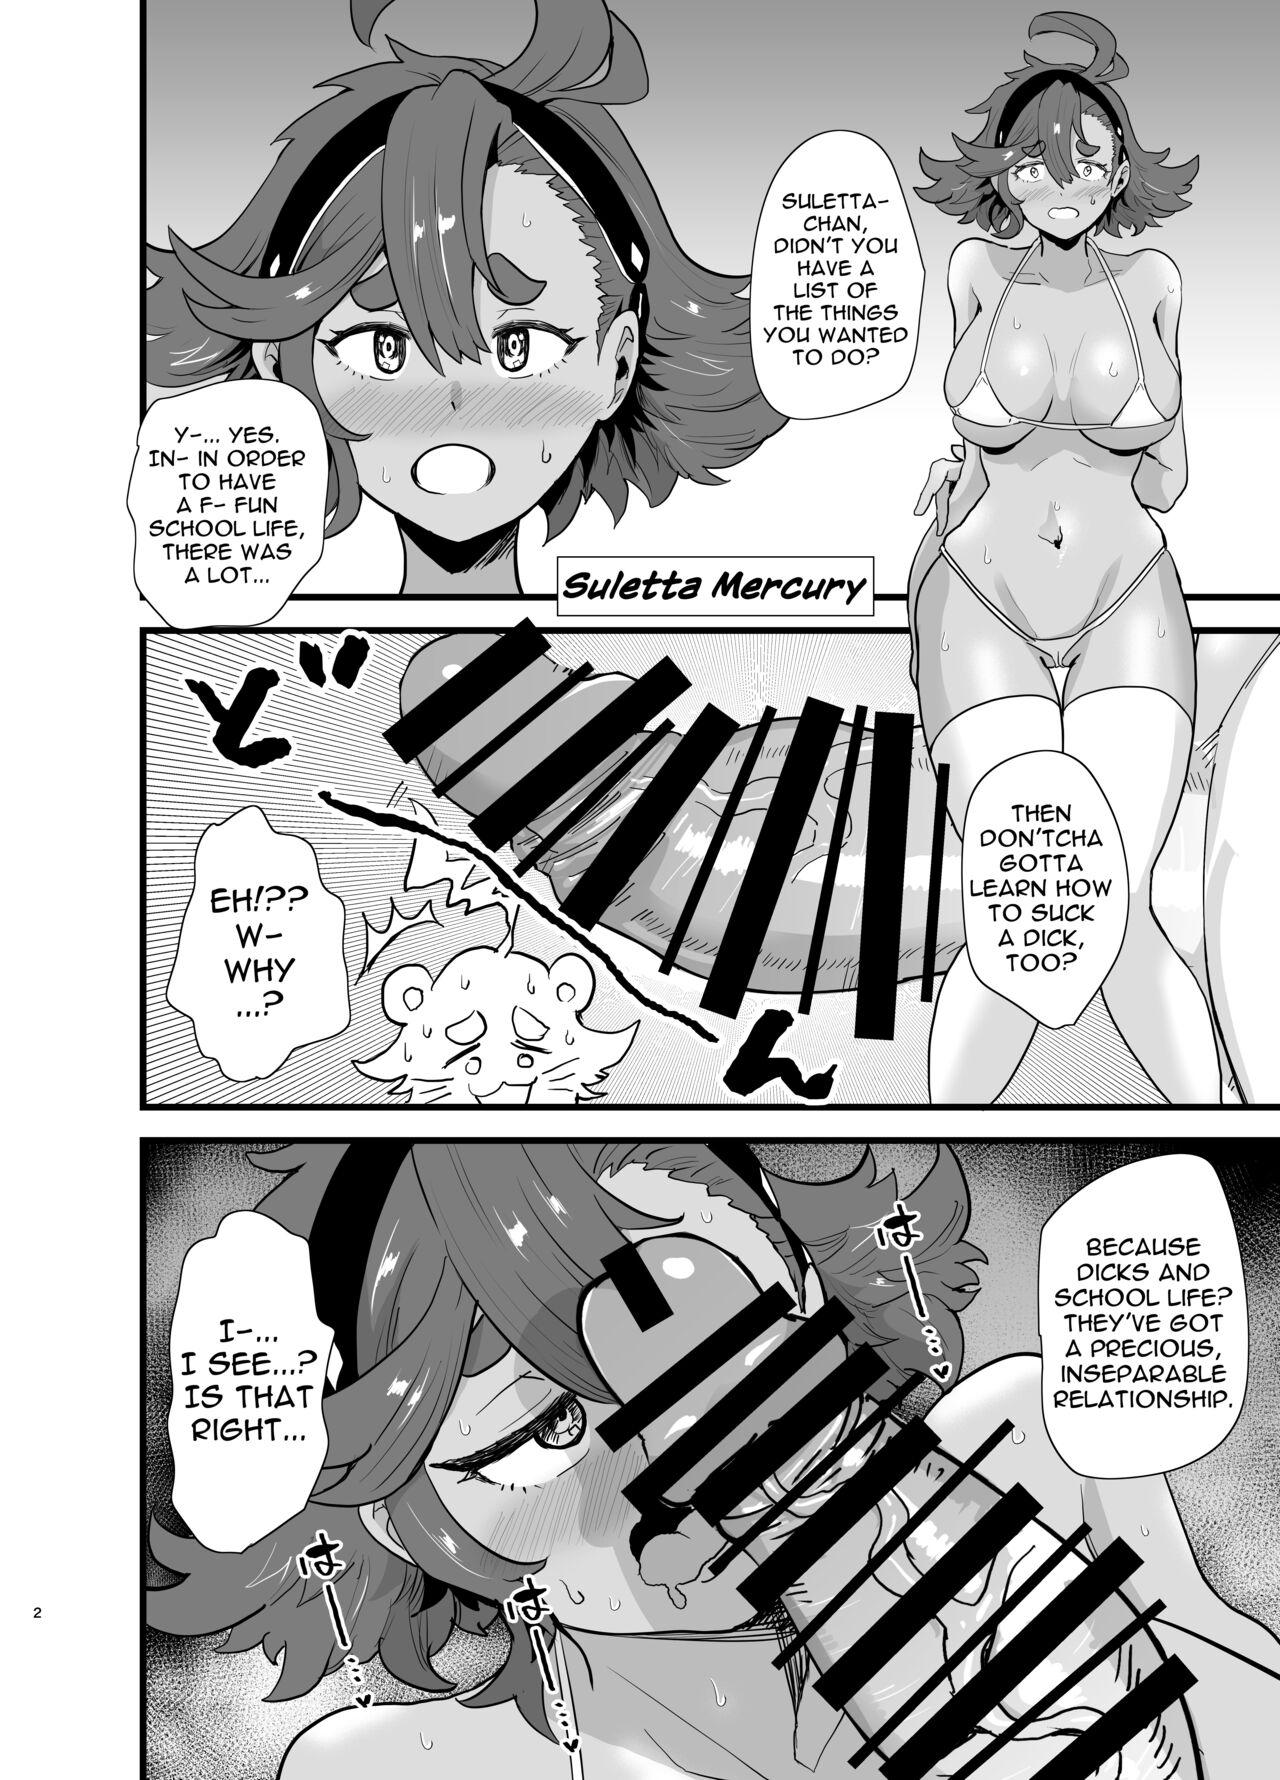 Nasty Gundam Fuuzoku Musou Suisei no Majo Hen | The Unparalleled Gundam Sex Industry - Witch of Mercury Edition - Mobile suit gundam the witch from mercury Cousin - Page 3